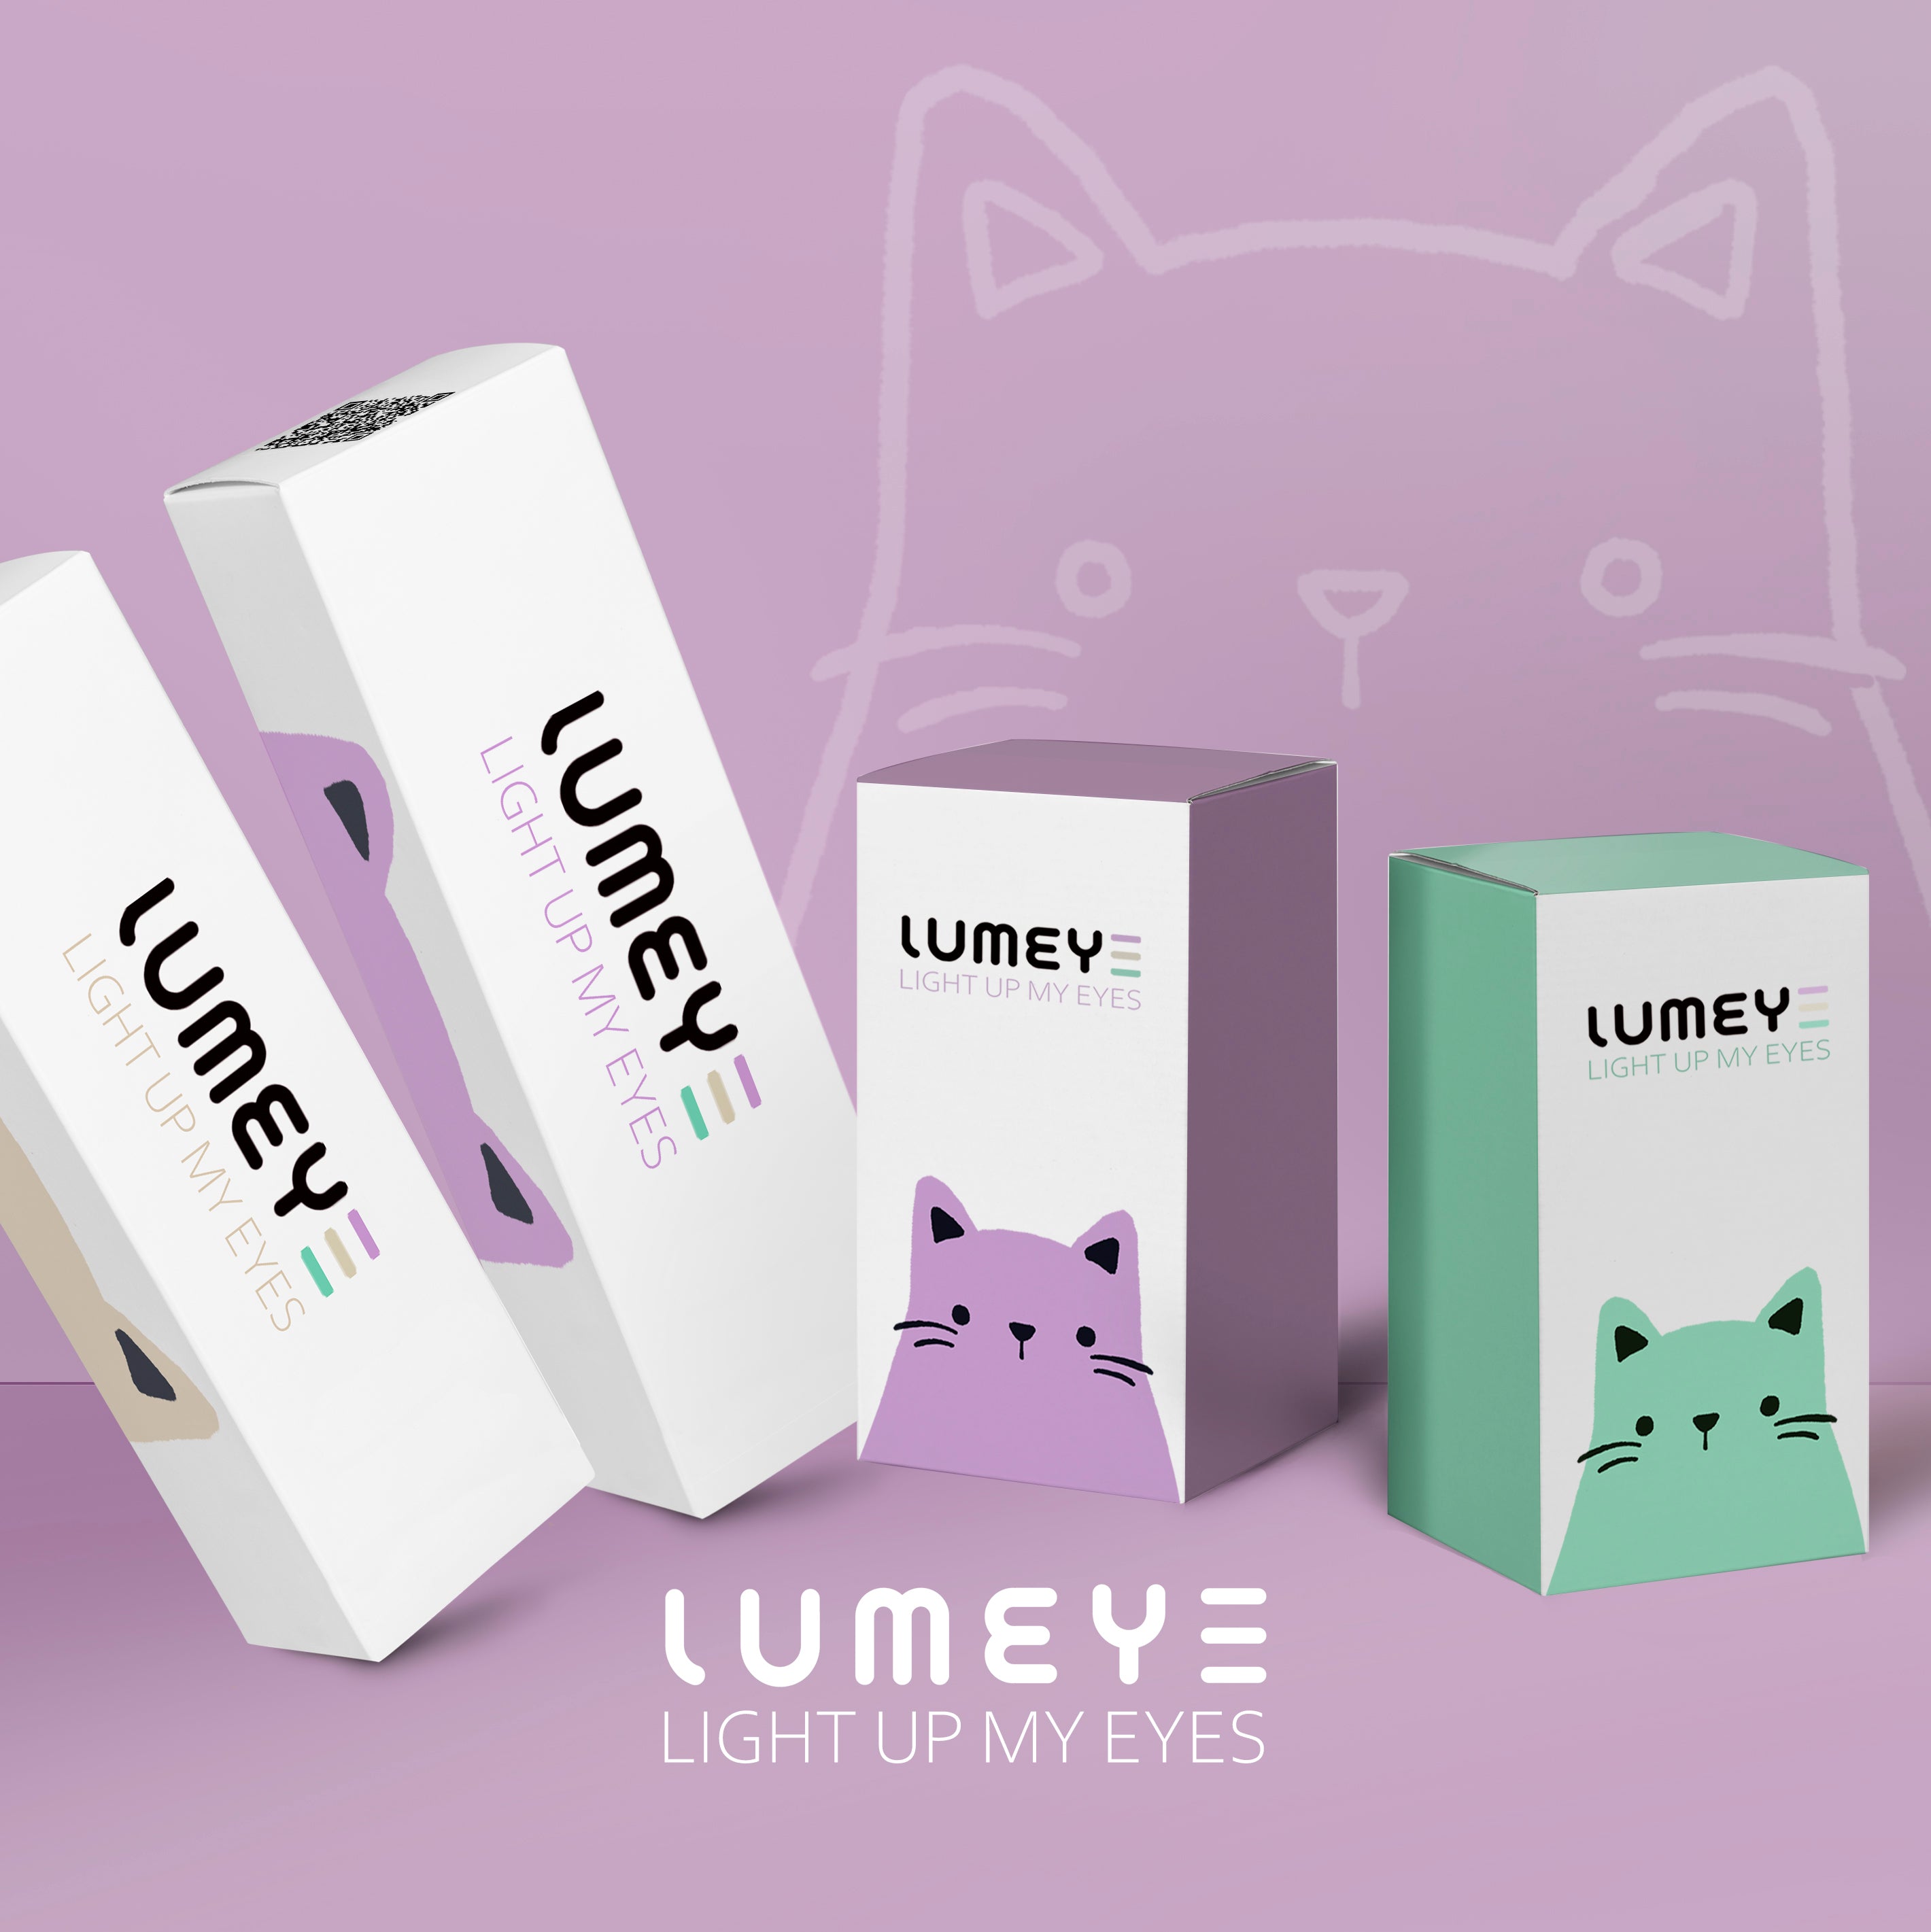 Best COLORED CONTACTS - LUMEYE Winnie Brown Colored Contact Lenses - LUMEYE